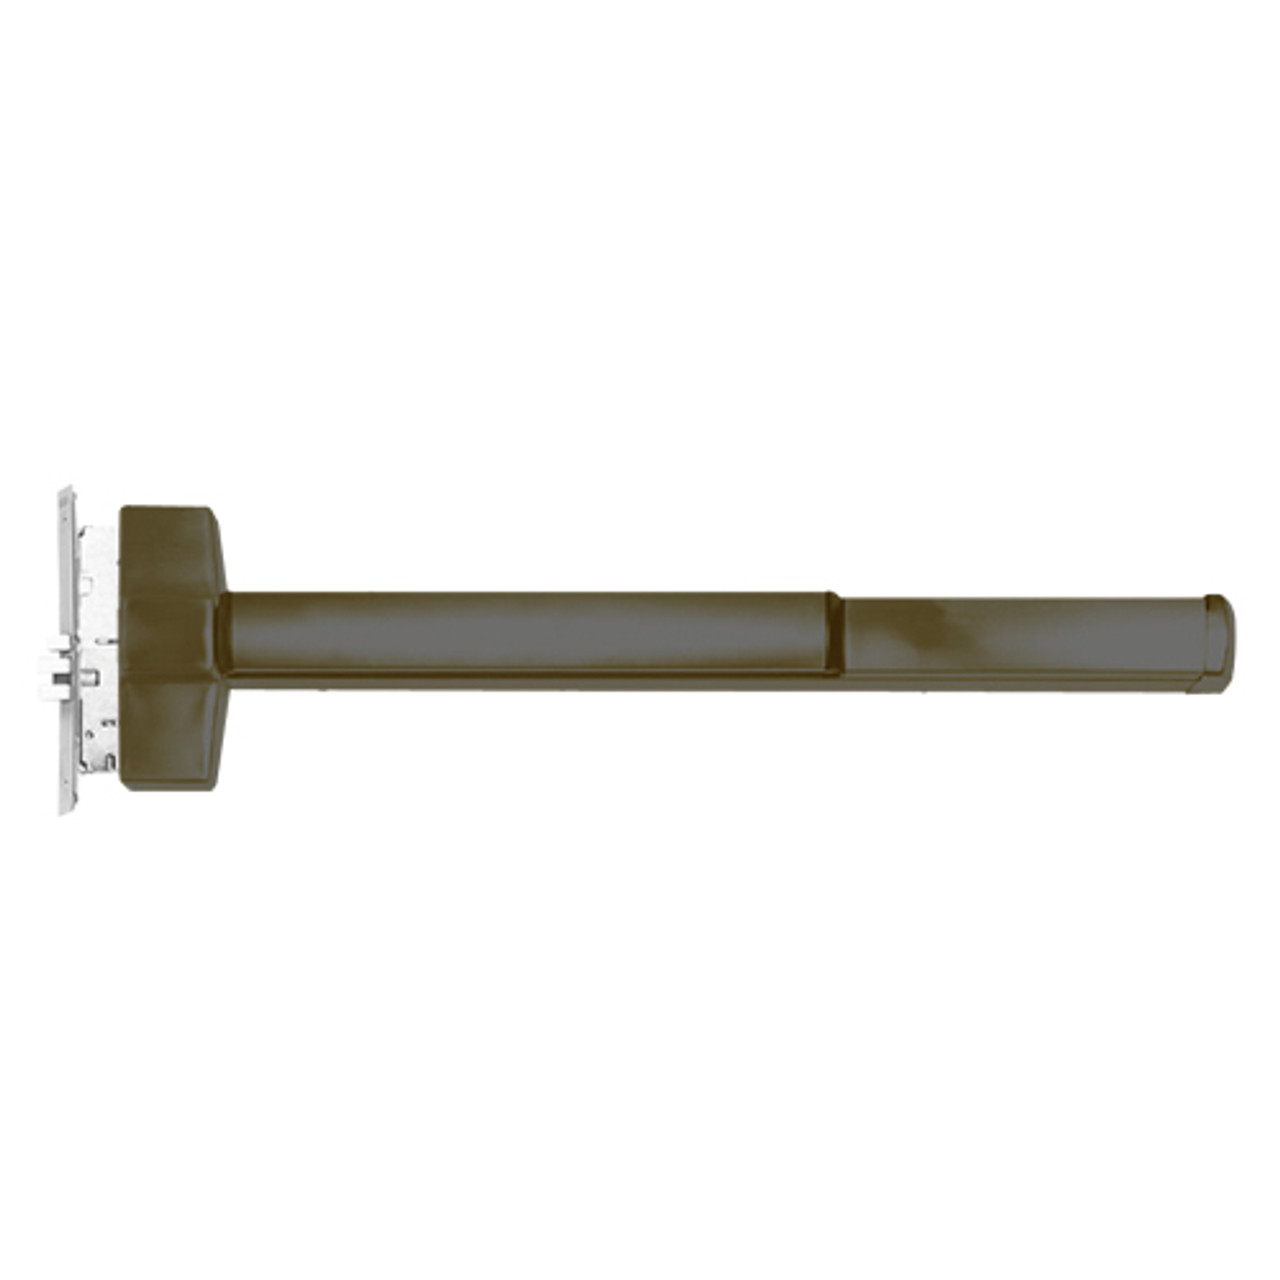 ED5657AL-613-W048-LHR Corbin ED5600 Series Fire Rated Mortise Exit Device in Oil Rubbed Bronze Finish